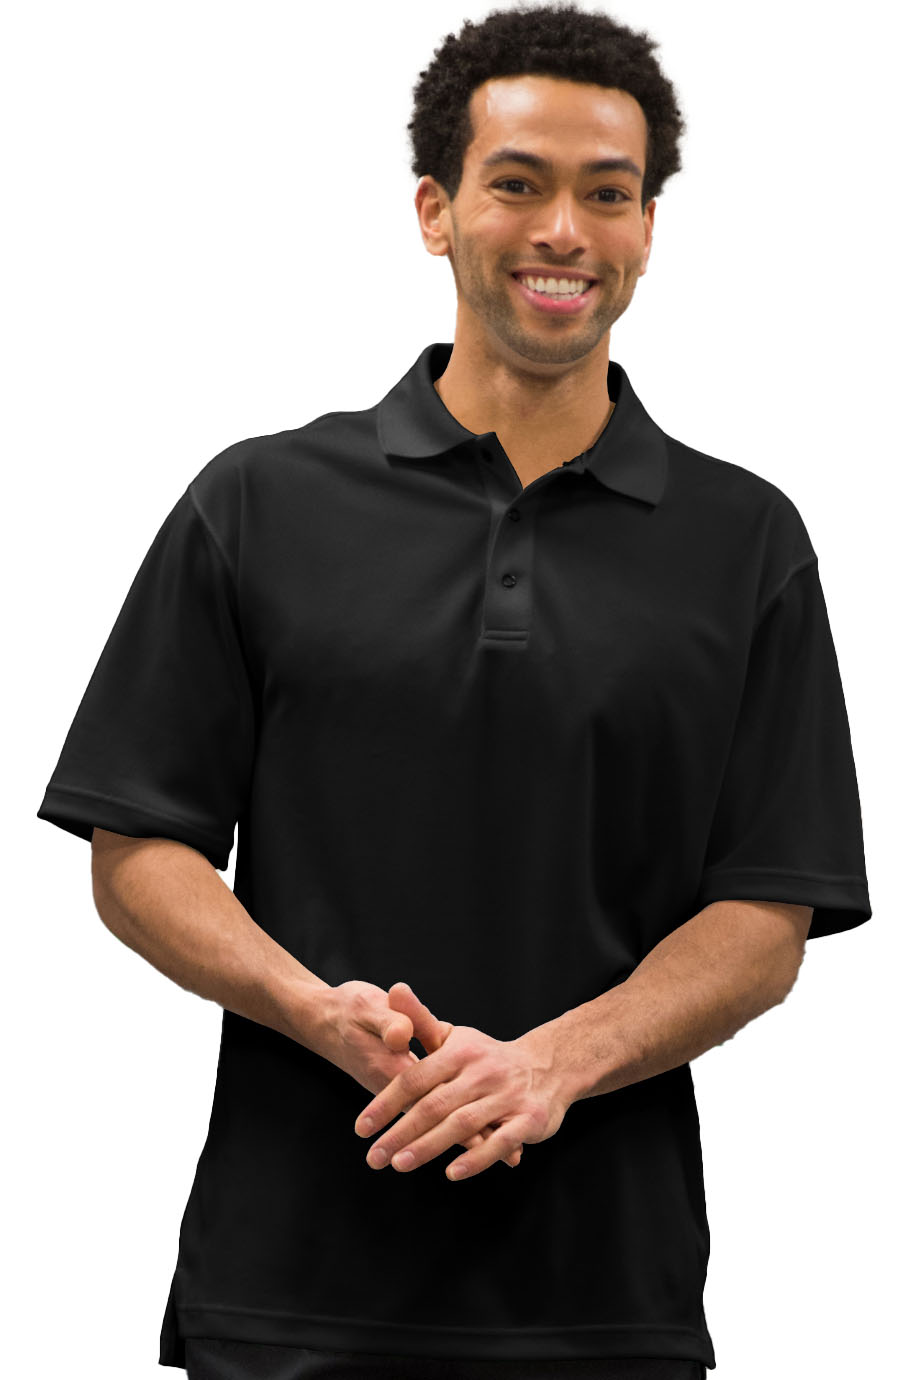 FOOD SERVICE MESH POLO WITH SNAP FRONT